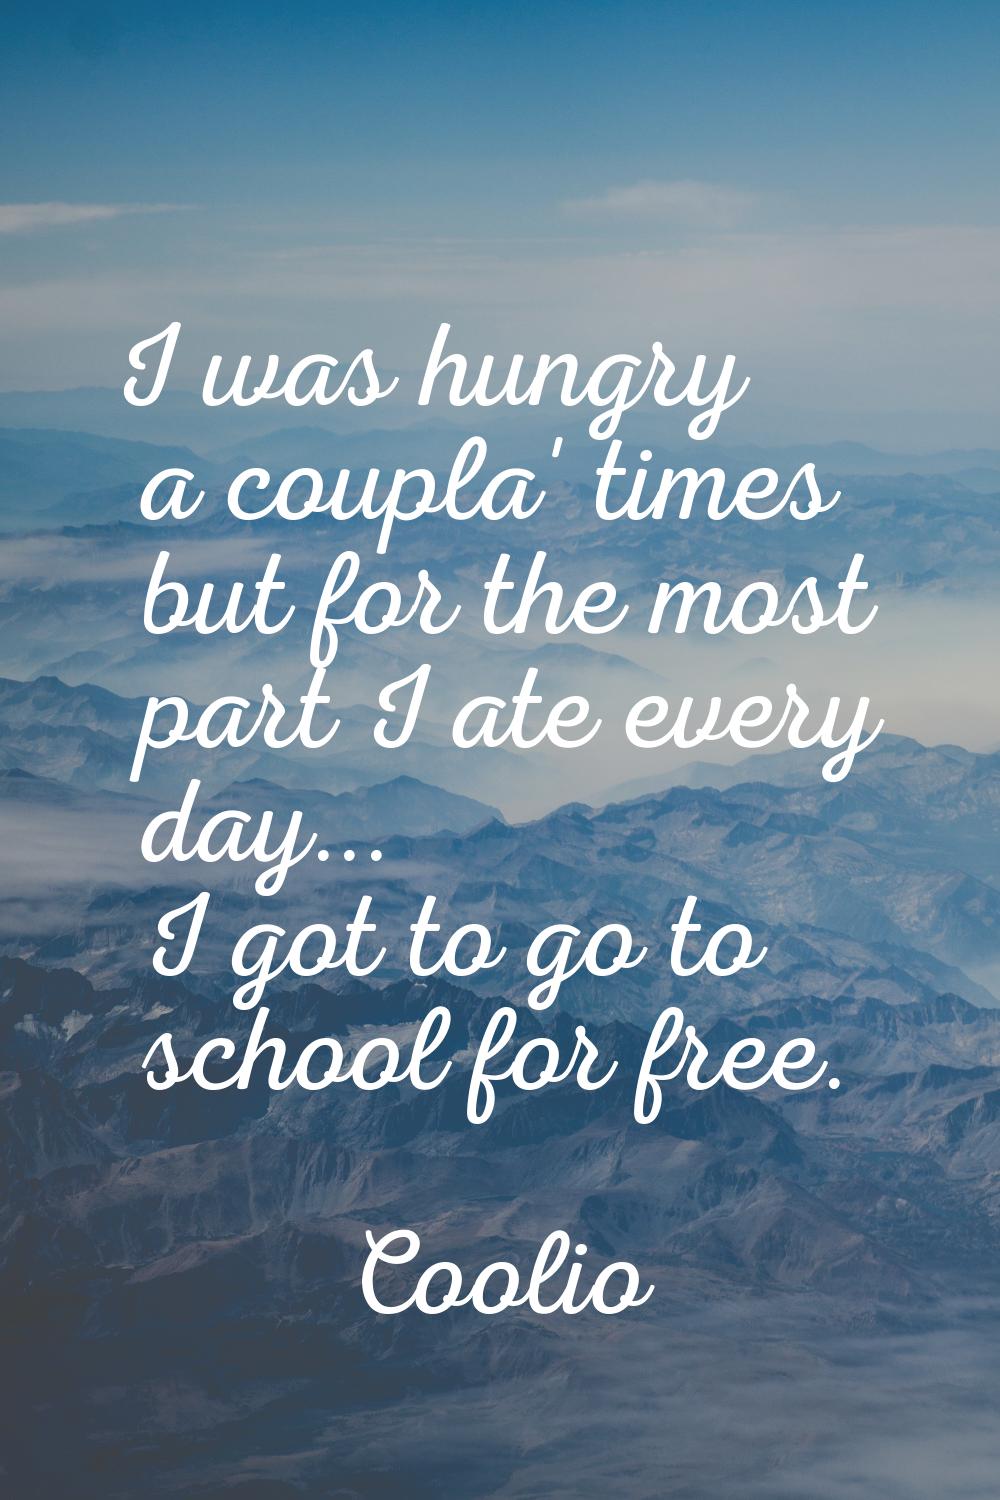 I was hungry a coupla' times but for the most part I ate every day... I got to go to school for fre